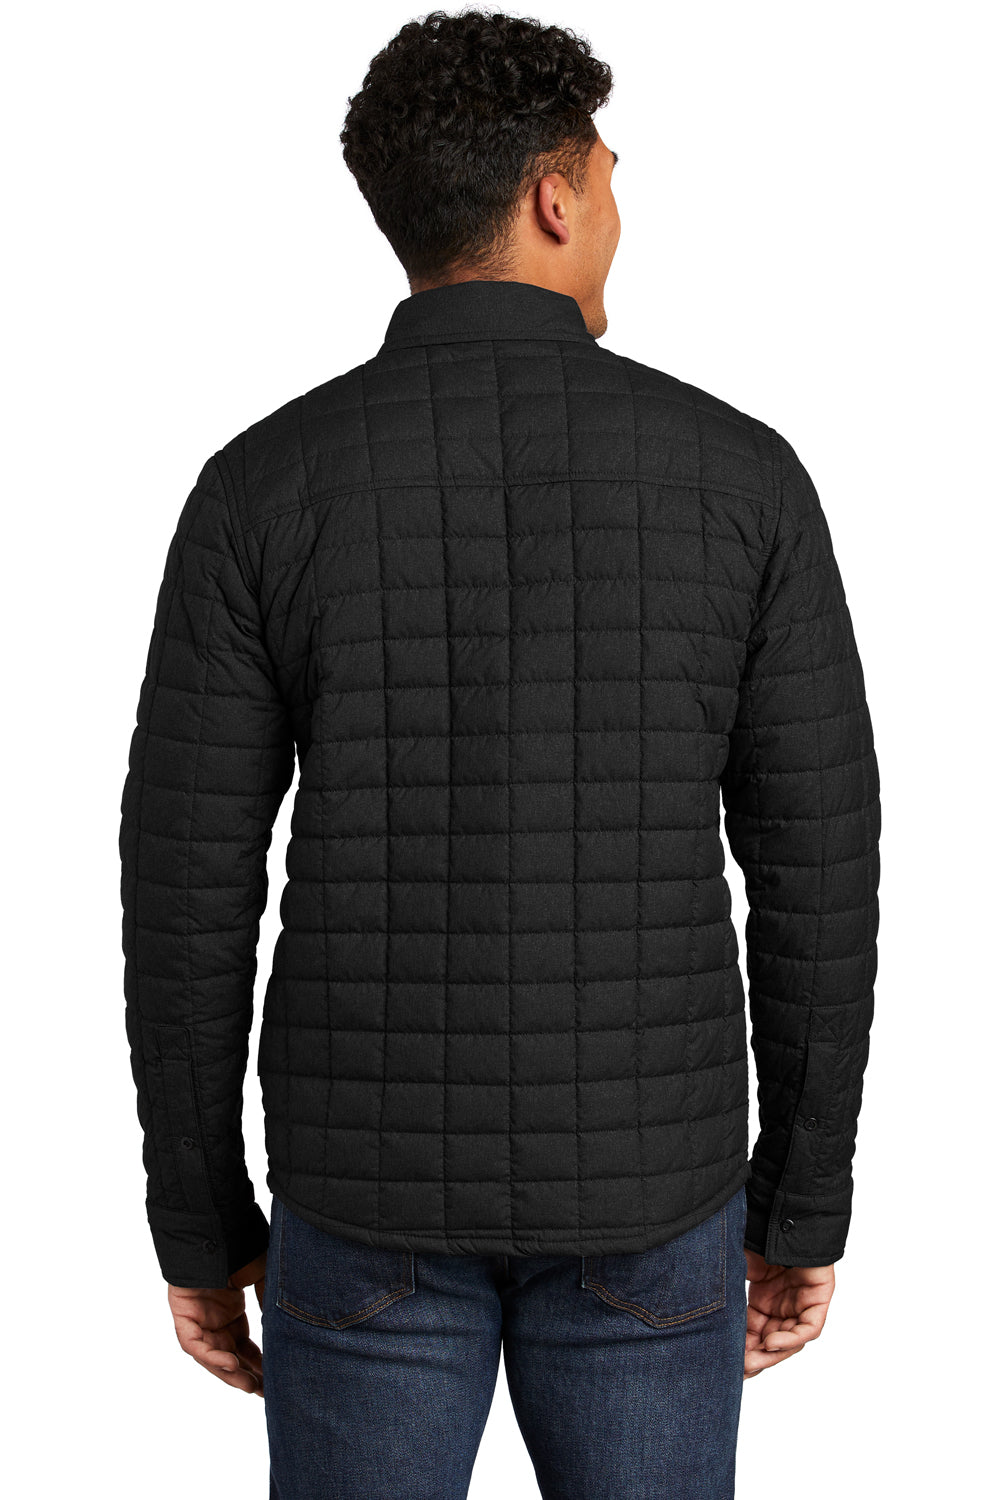 The North Face Mens ThermoBall Eco Shirt Jacket Black Side